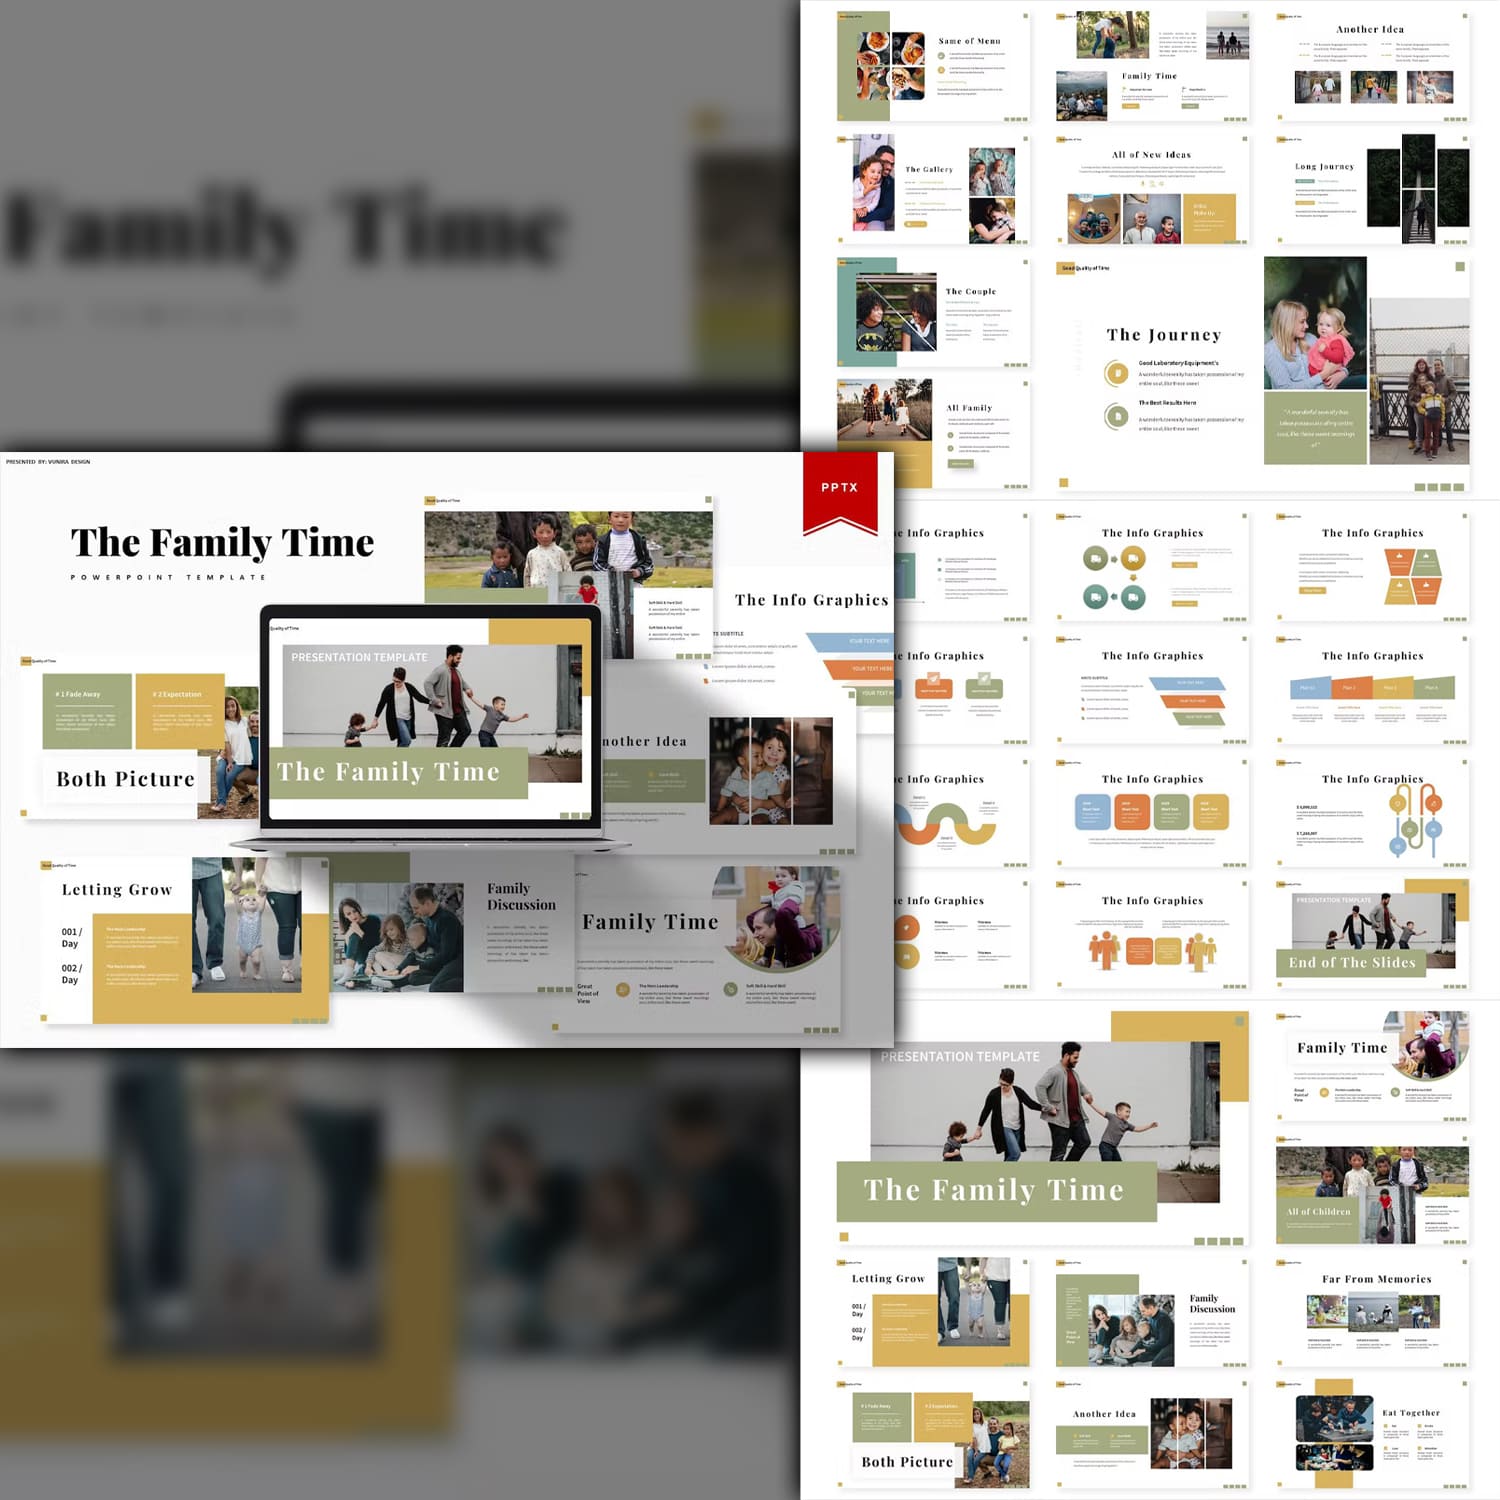 The family time powerpoint template from Vunira.